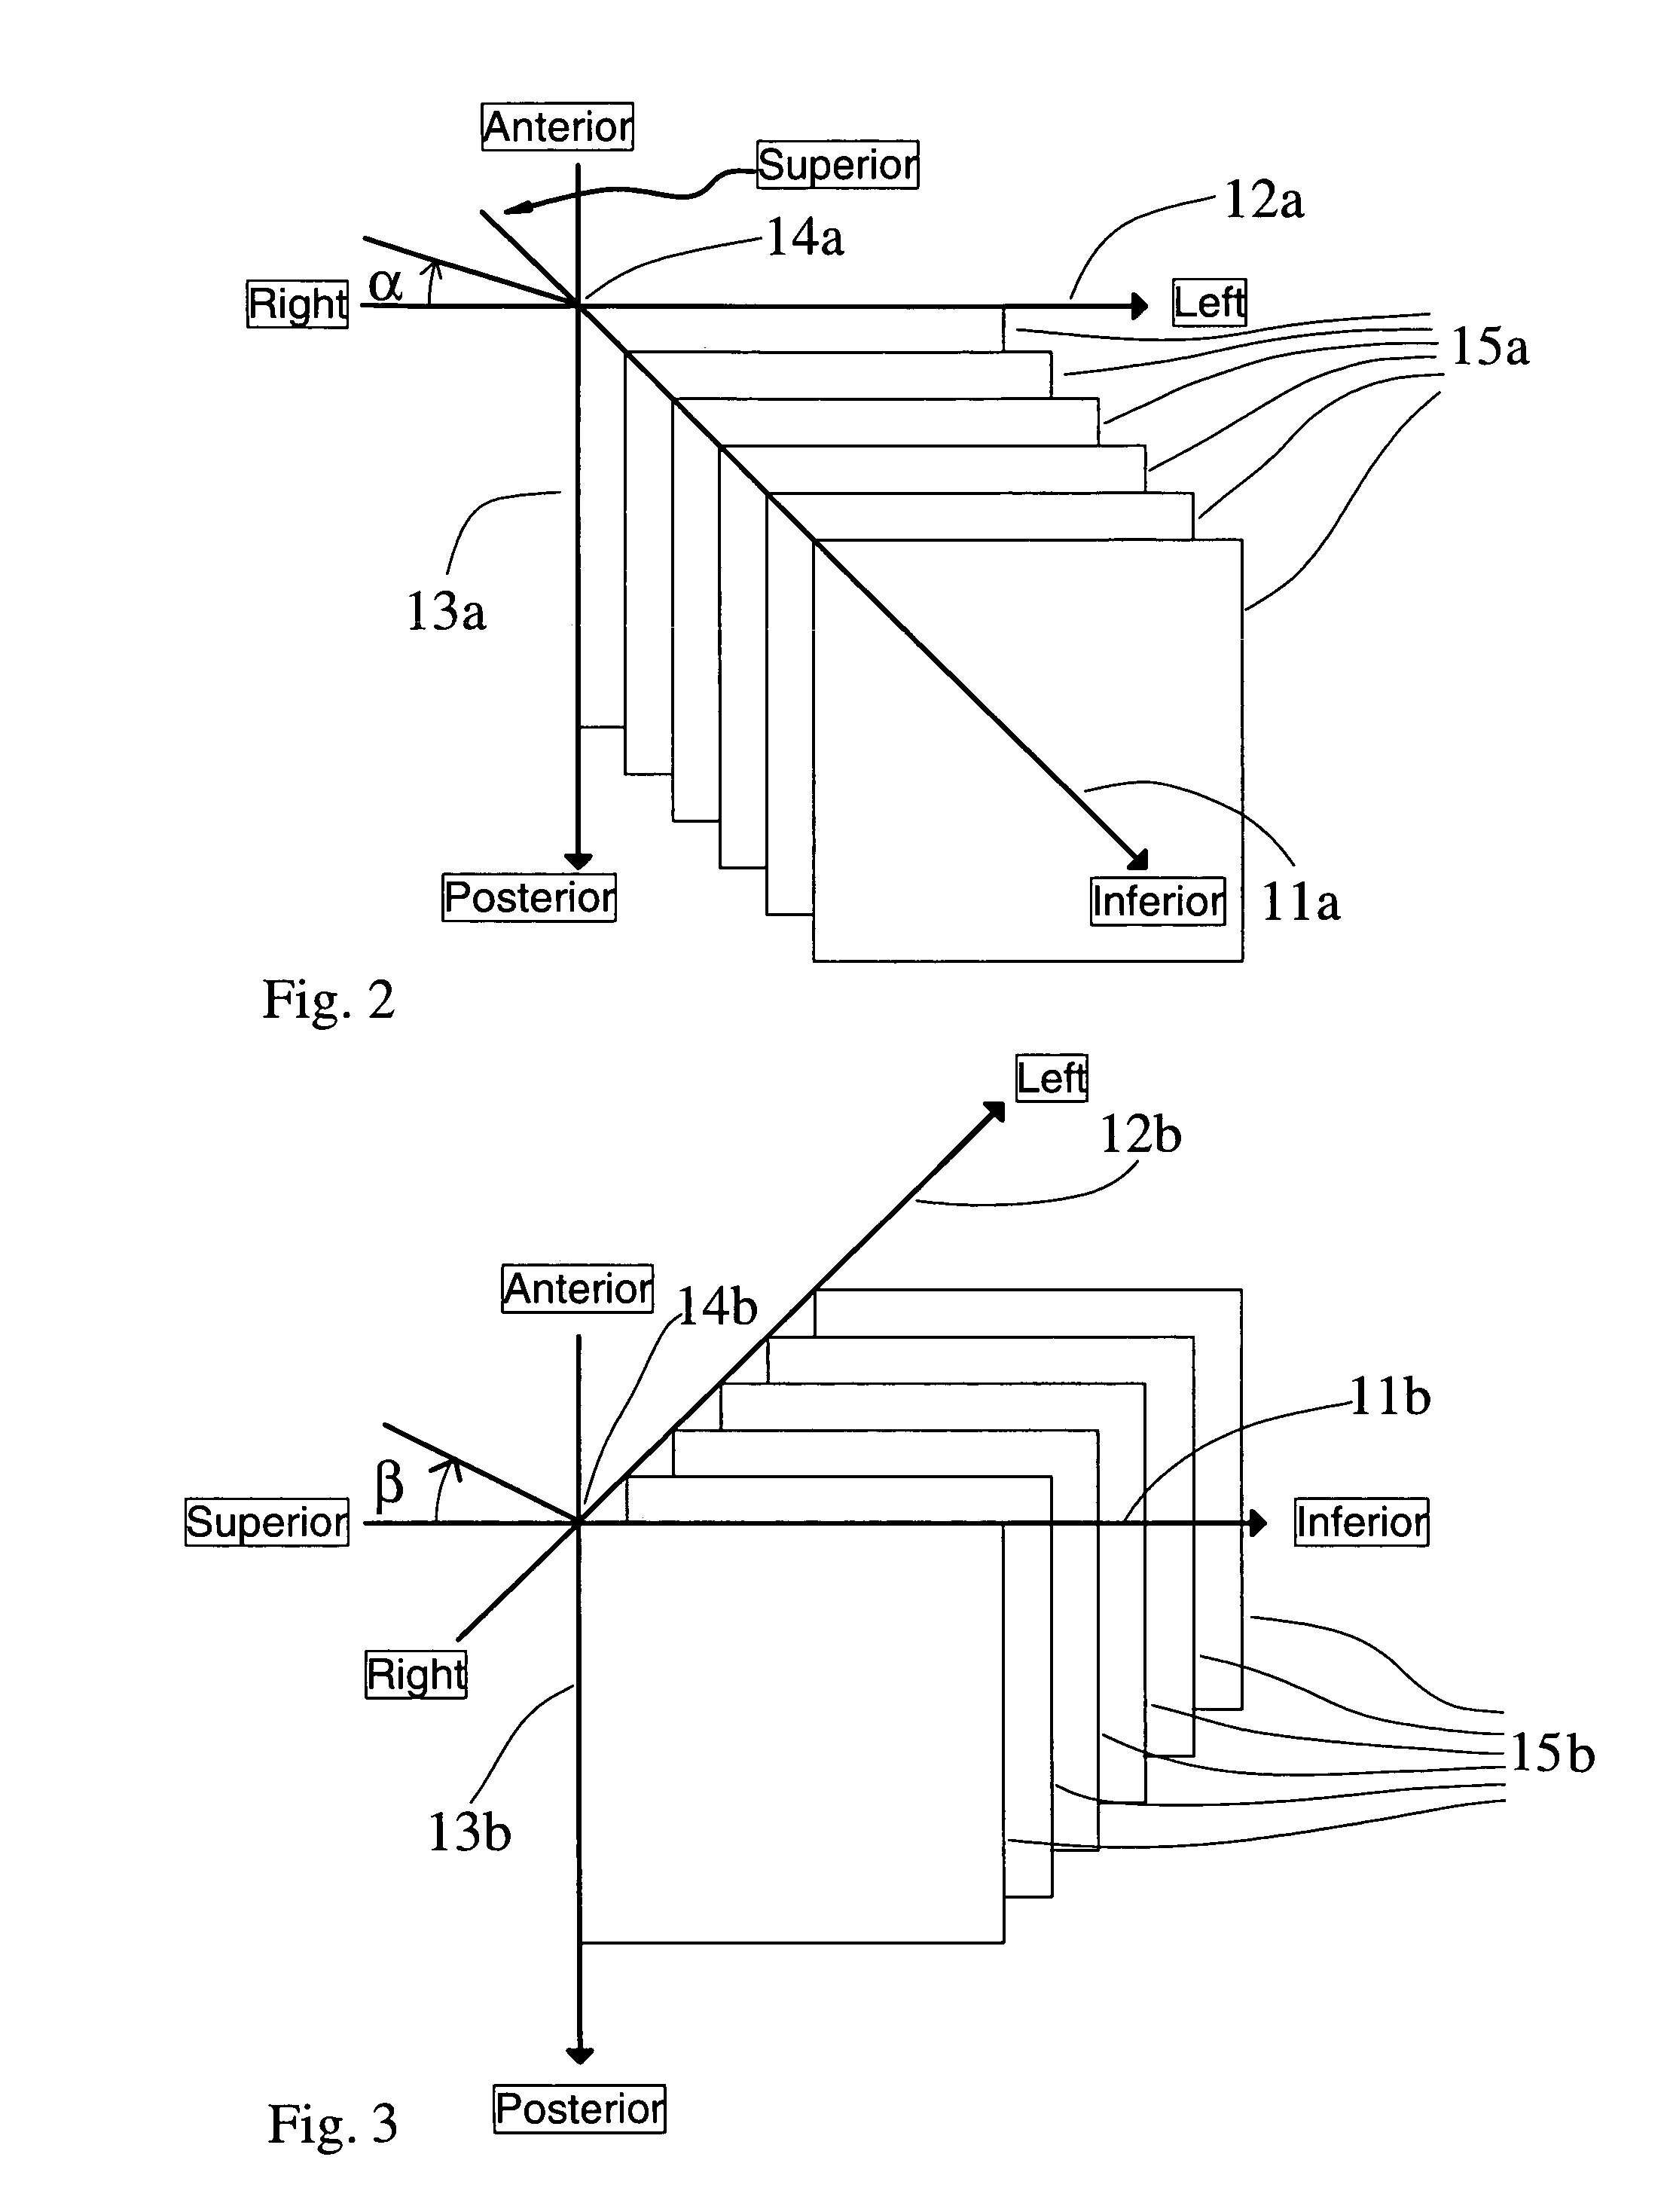 Method for assisted beam selection in radiation therapy planning